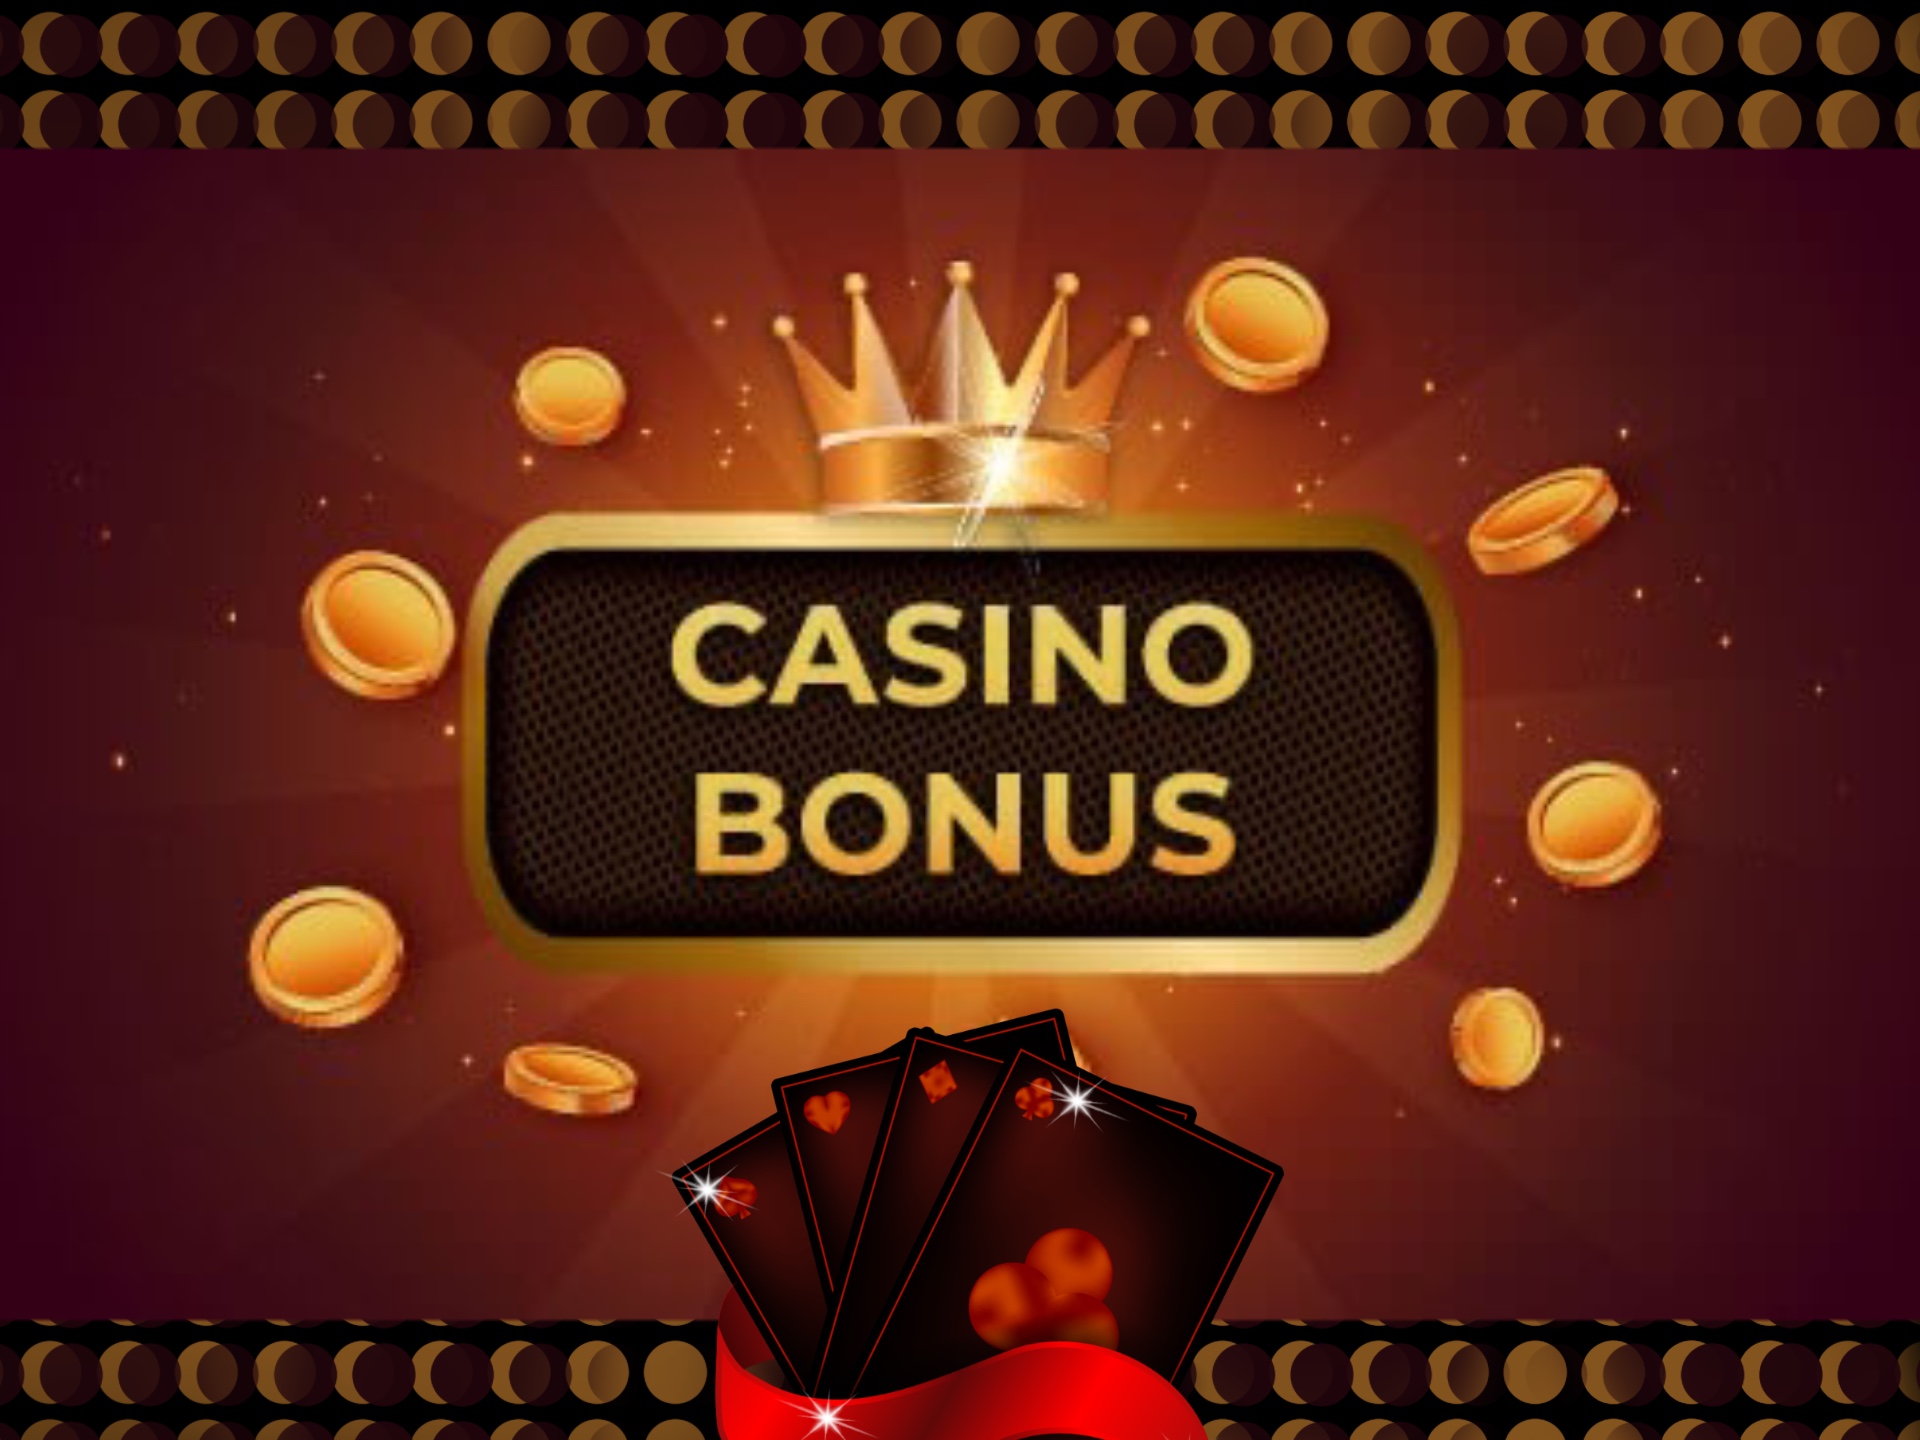 Usually online casinos have bonuses for both new and regular players.